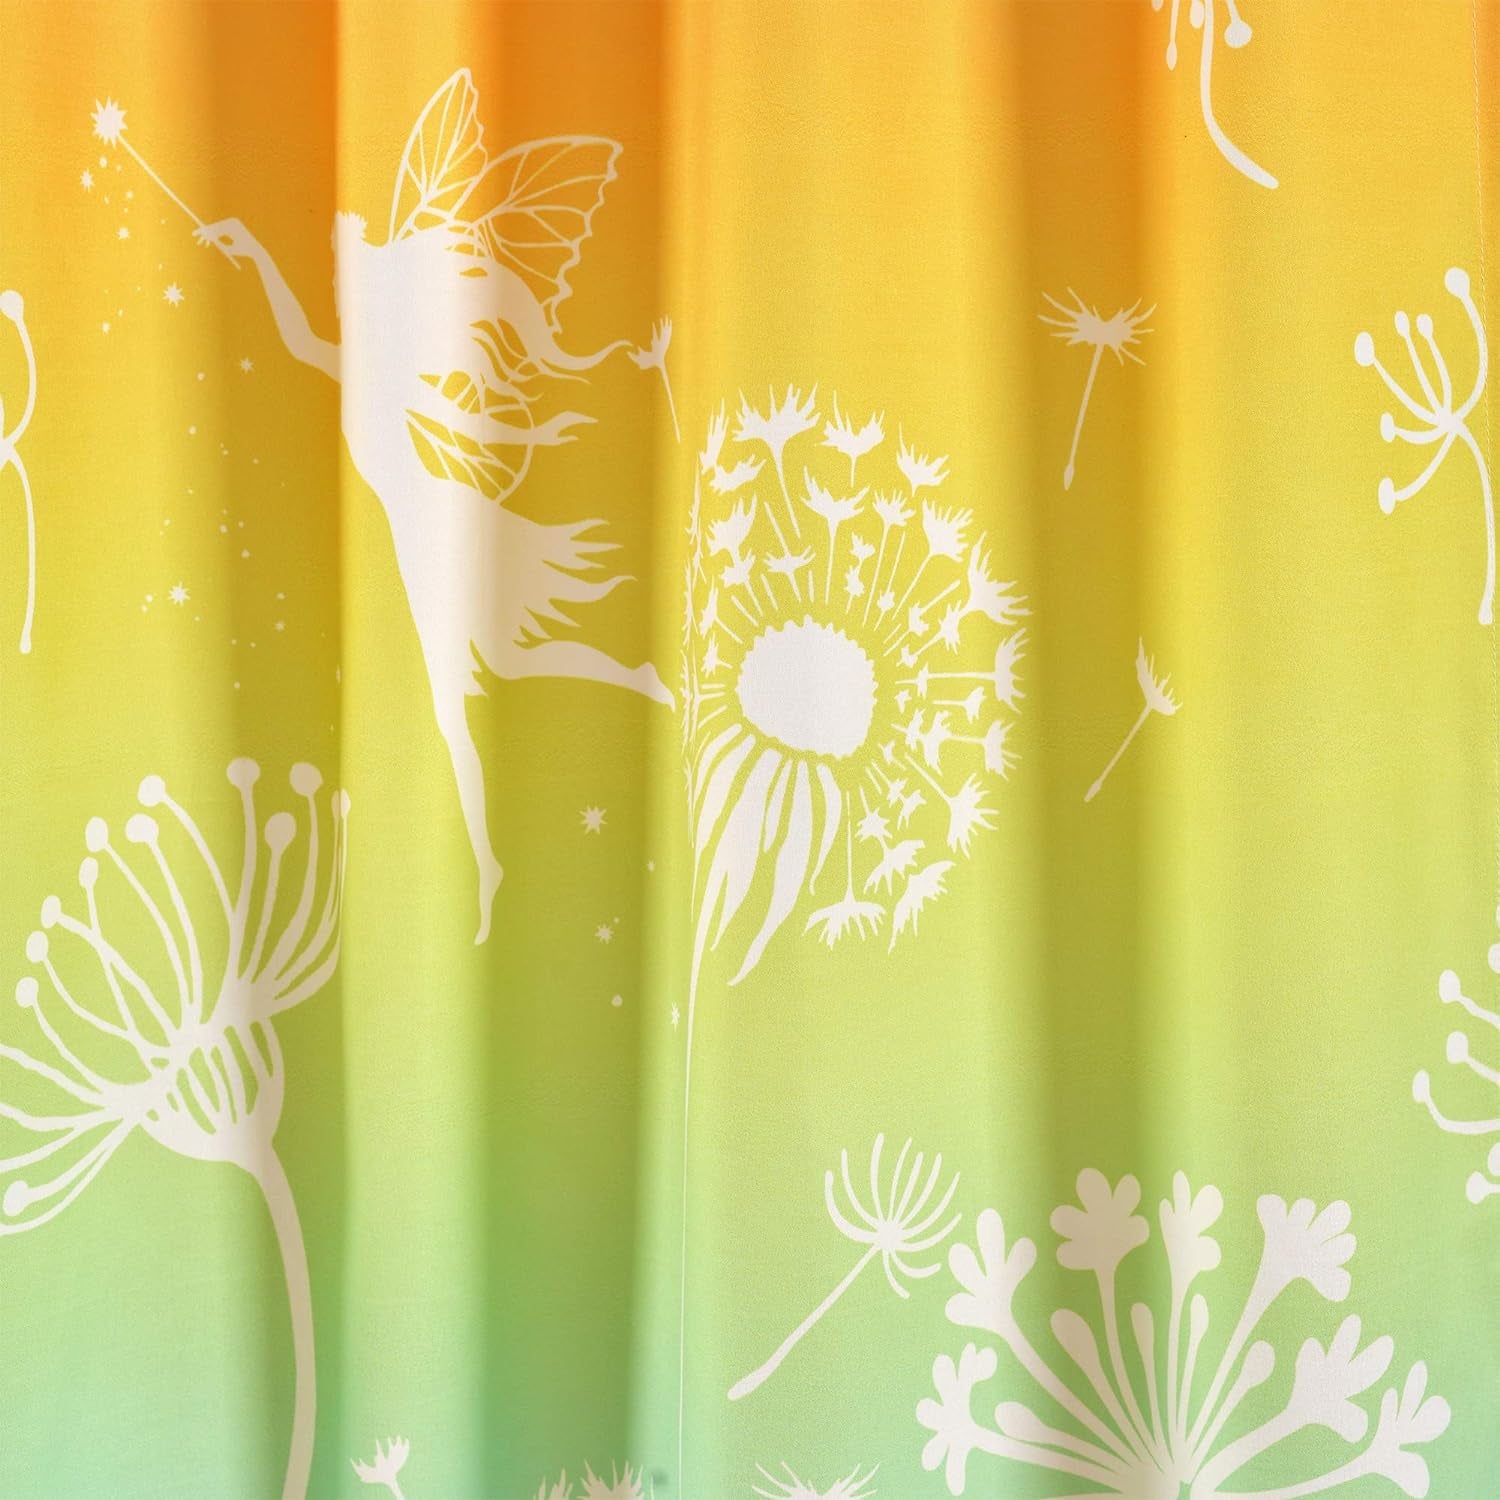 Dandelion Fairy Ombre Window Curtain Panel, Pair, 52"W X 84"L, Pastel Rainbow - Whimsical Floral Fantasy Curtains for Kids Room